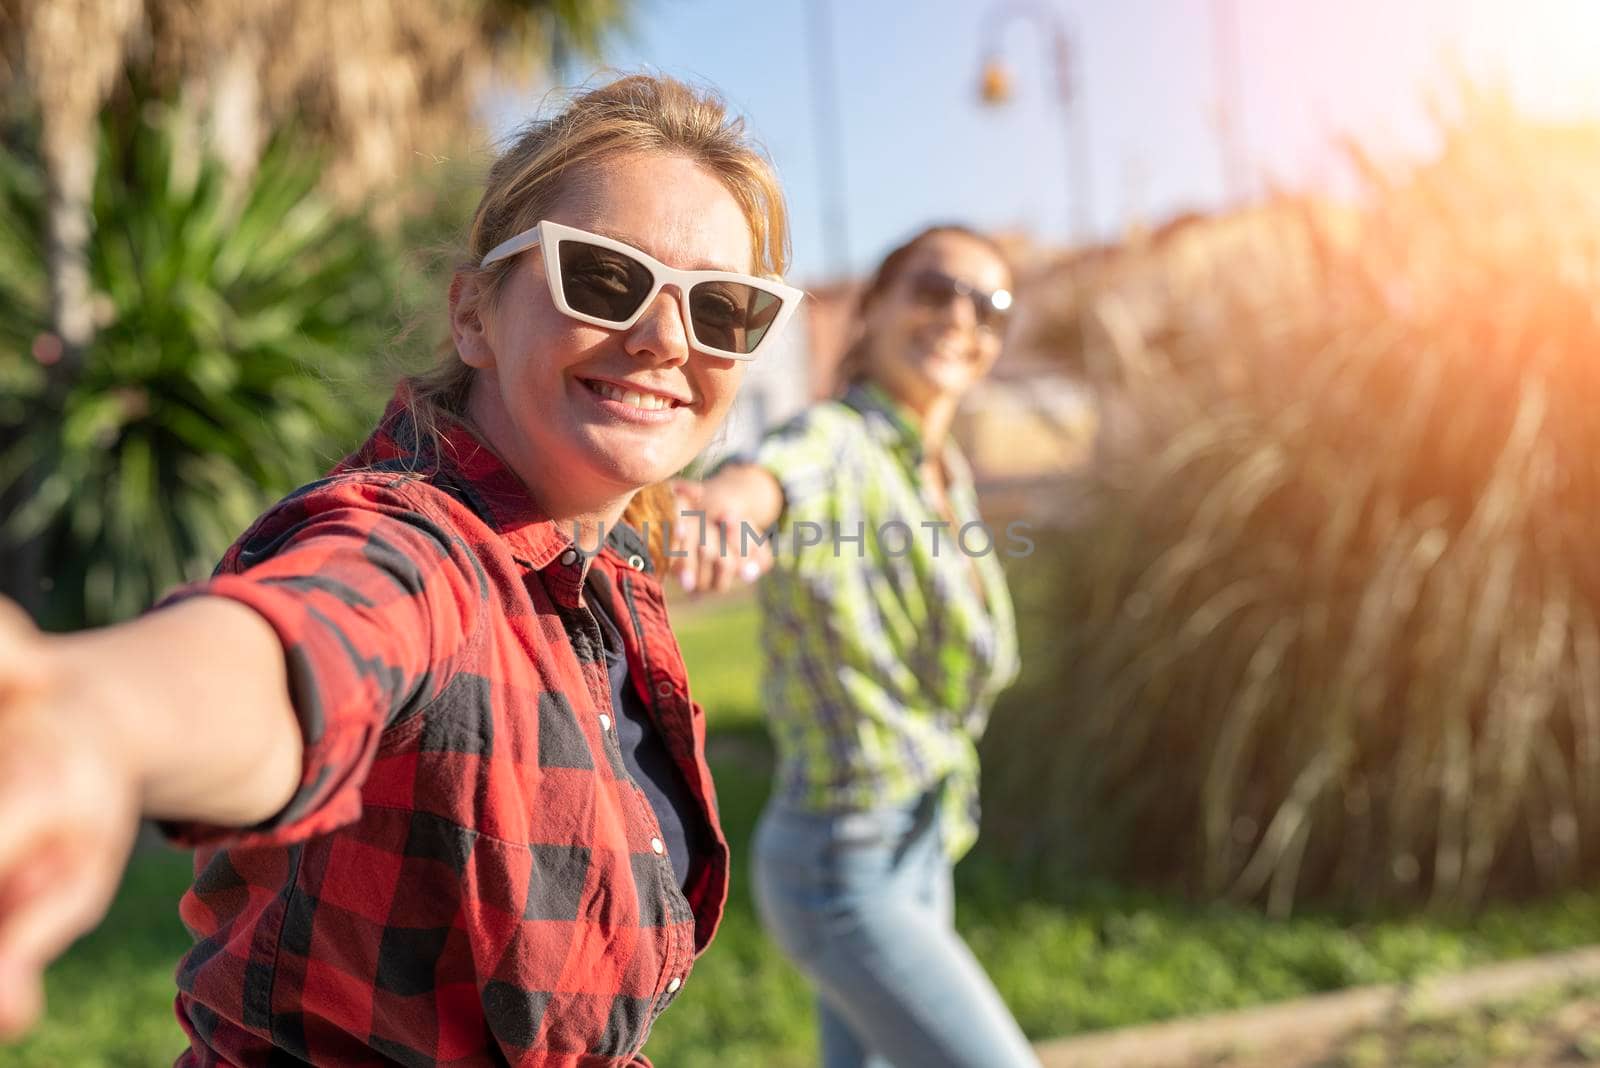 Pretty young caucasian woman in sunglasses pulling along by the hand invitingly with a happy smile as her friend on the background. Sunny summer day.